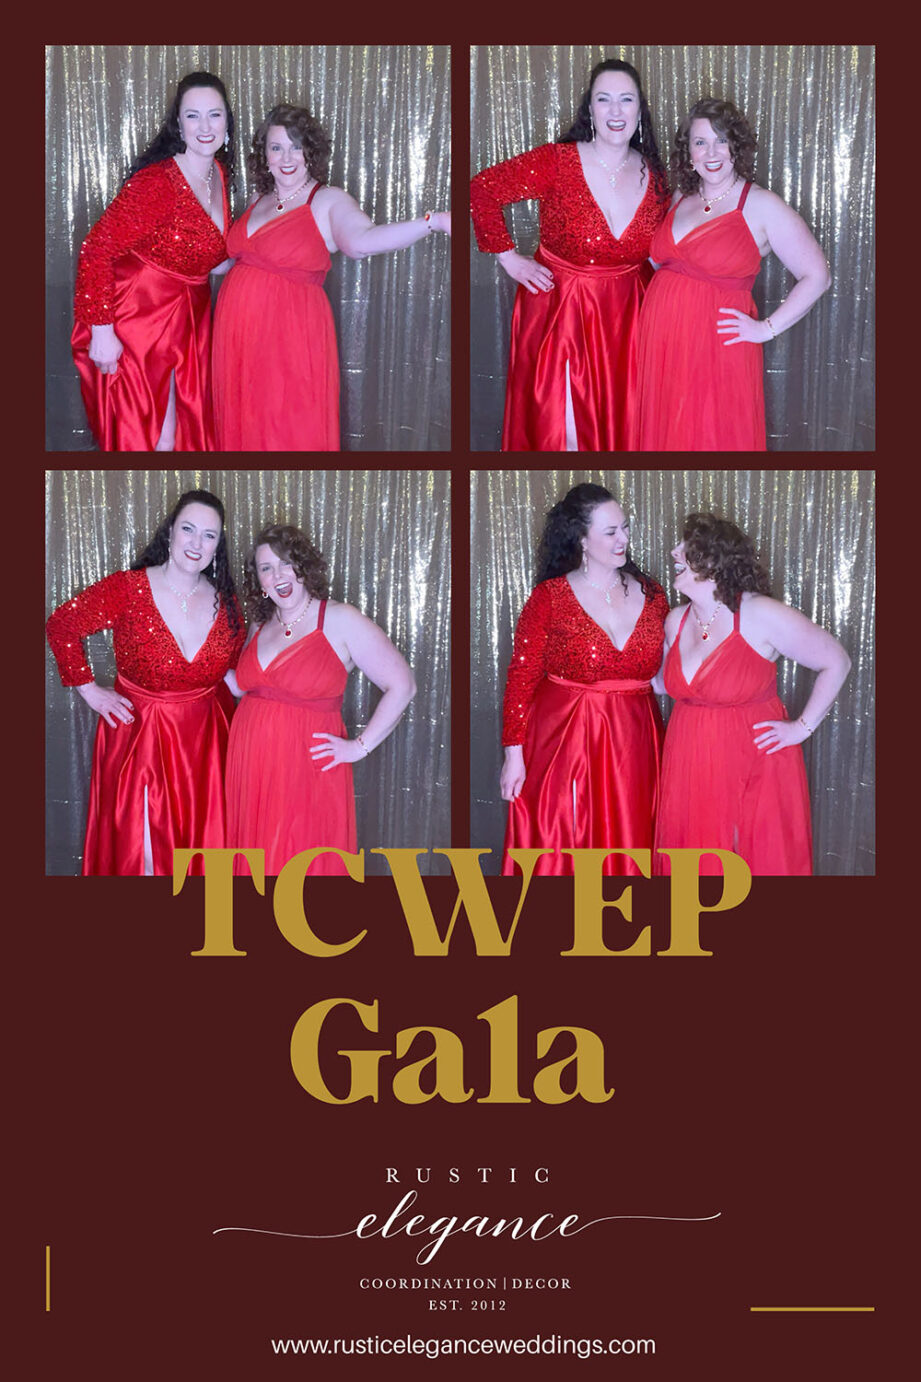 Event Photobooth Images Twin Cities Rustic elegance